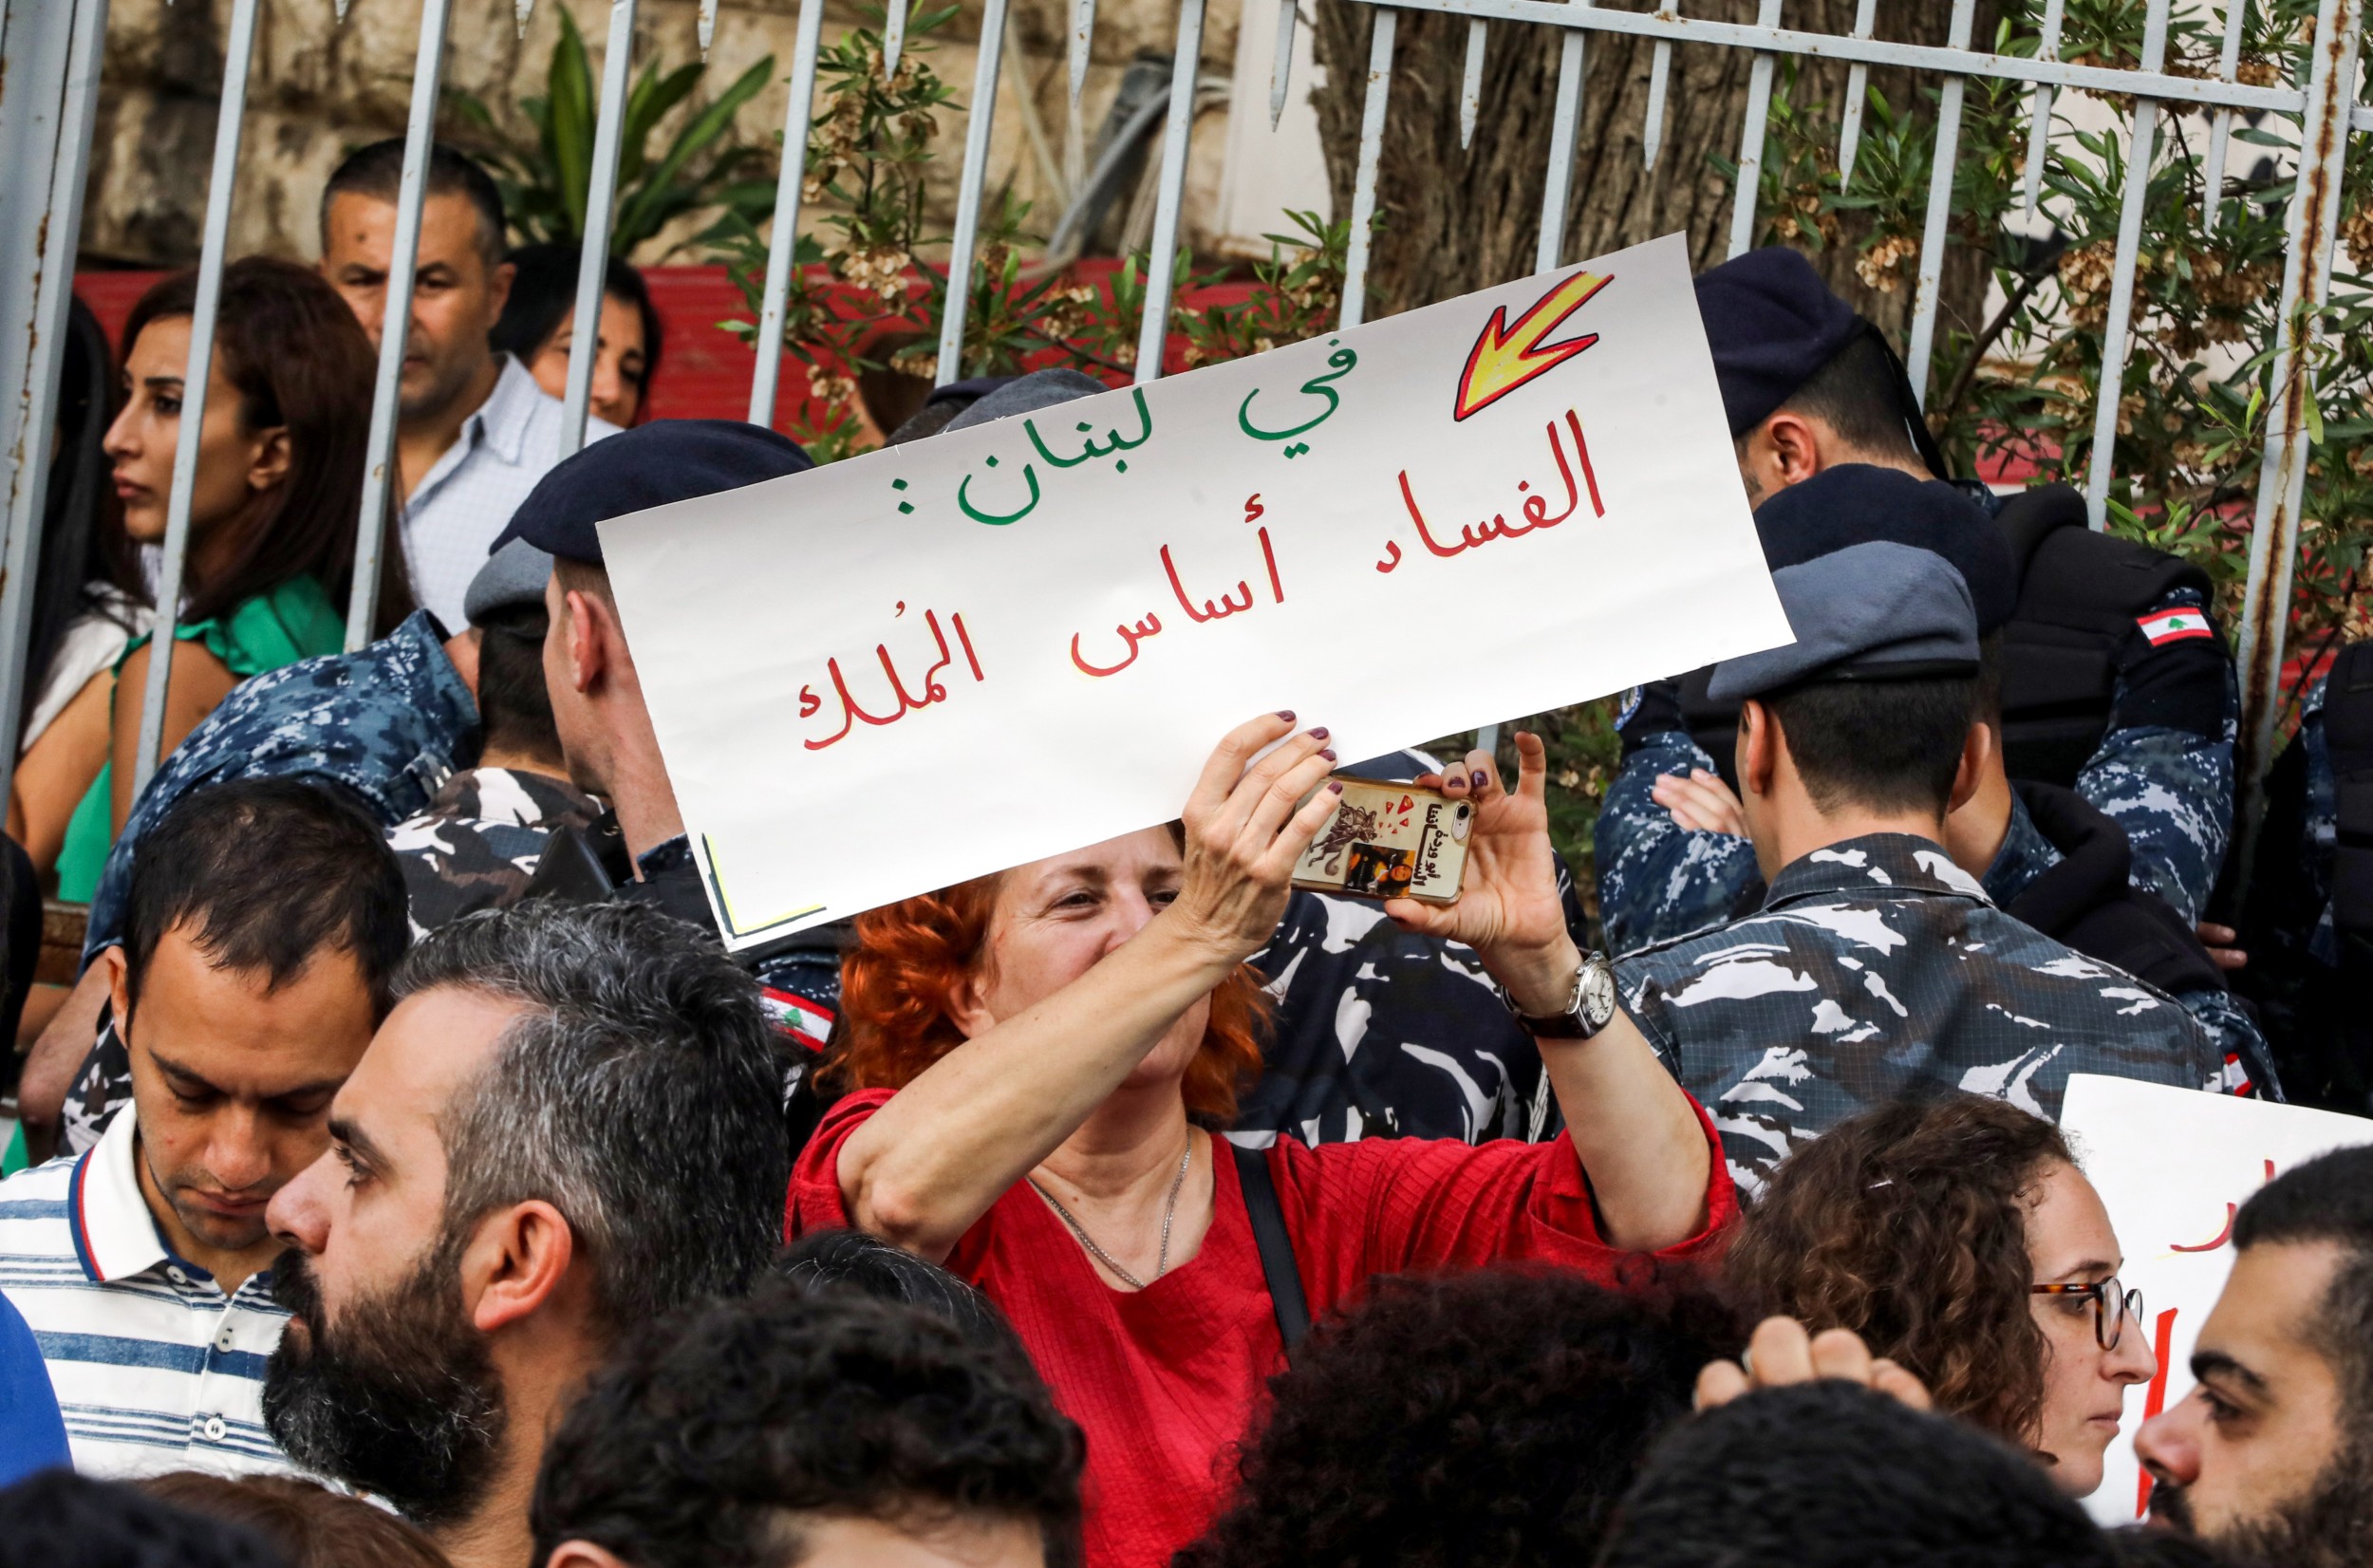 A Lebanese woman holds up a sign reading in Arabic "in Lebanon, corruption is the basis of rule", during a demonstration at the entrance of the Justice Palace in Beirut on 6 November 2019 (AFP)